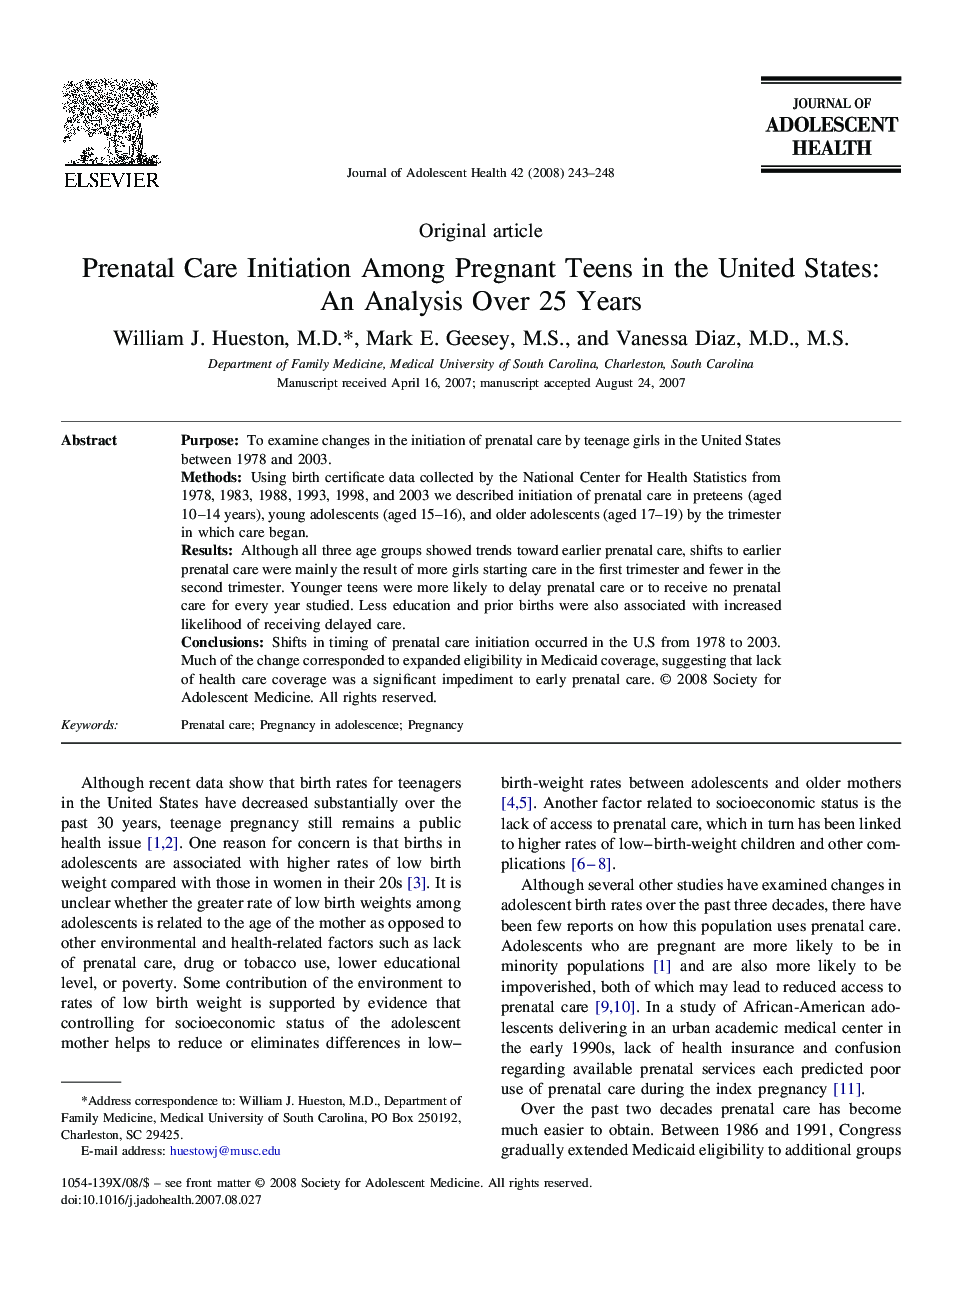 Prenatal Care Initiation Among Pregnant Teens in the United States: An Analysis Over 25 Years